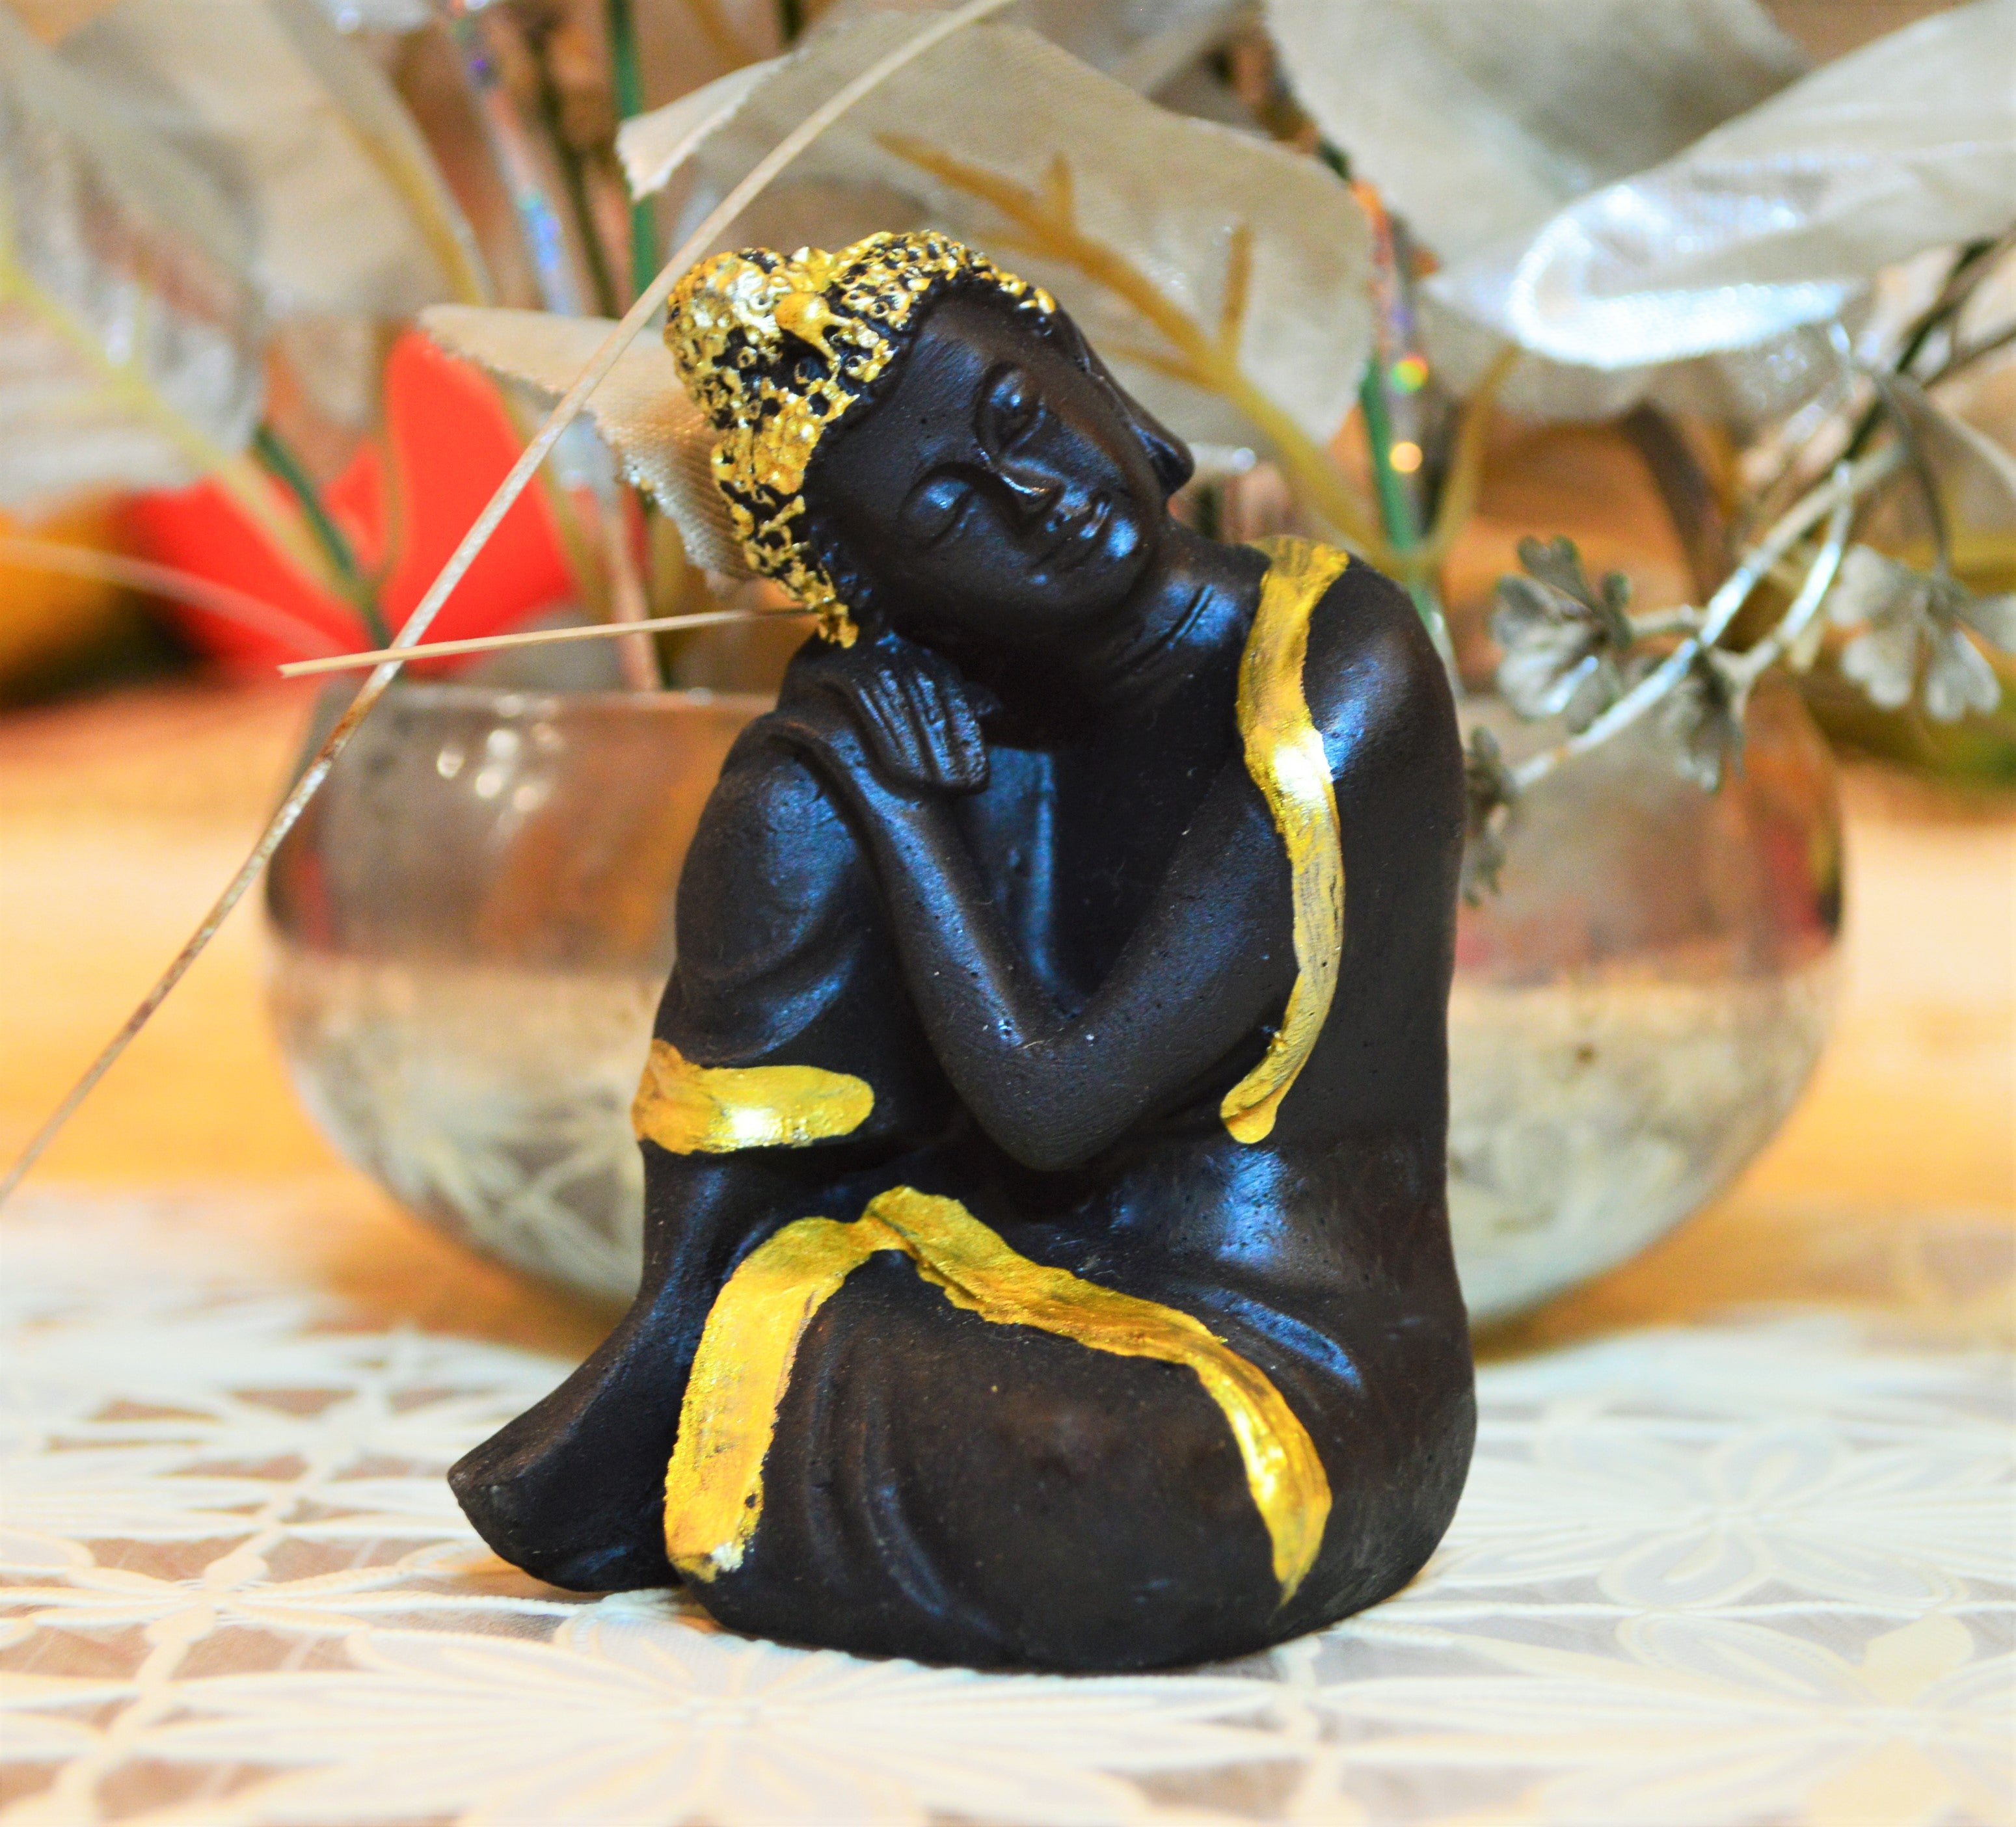 Buy Buddha Statue Online India at Best Prices, Buddha Décor Gifts